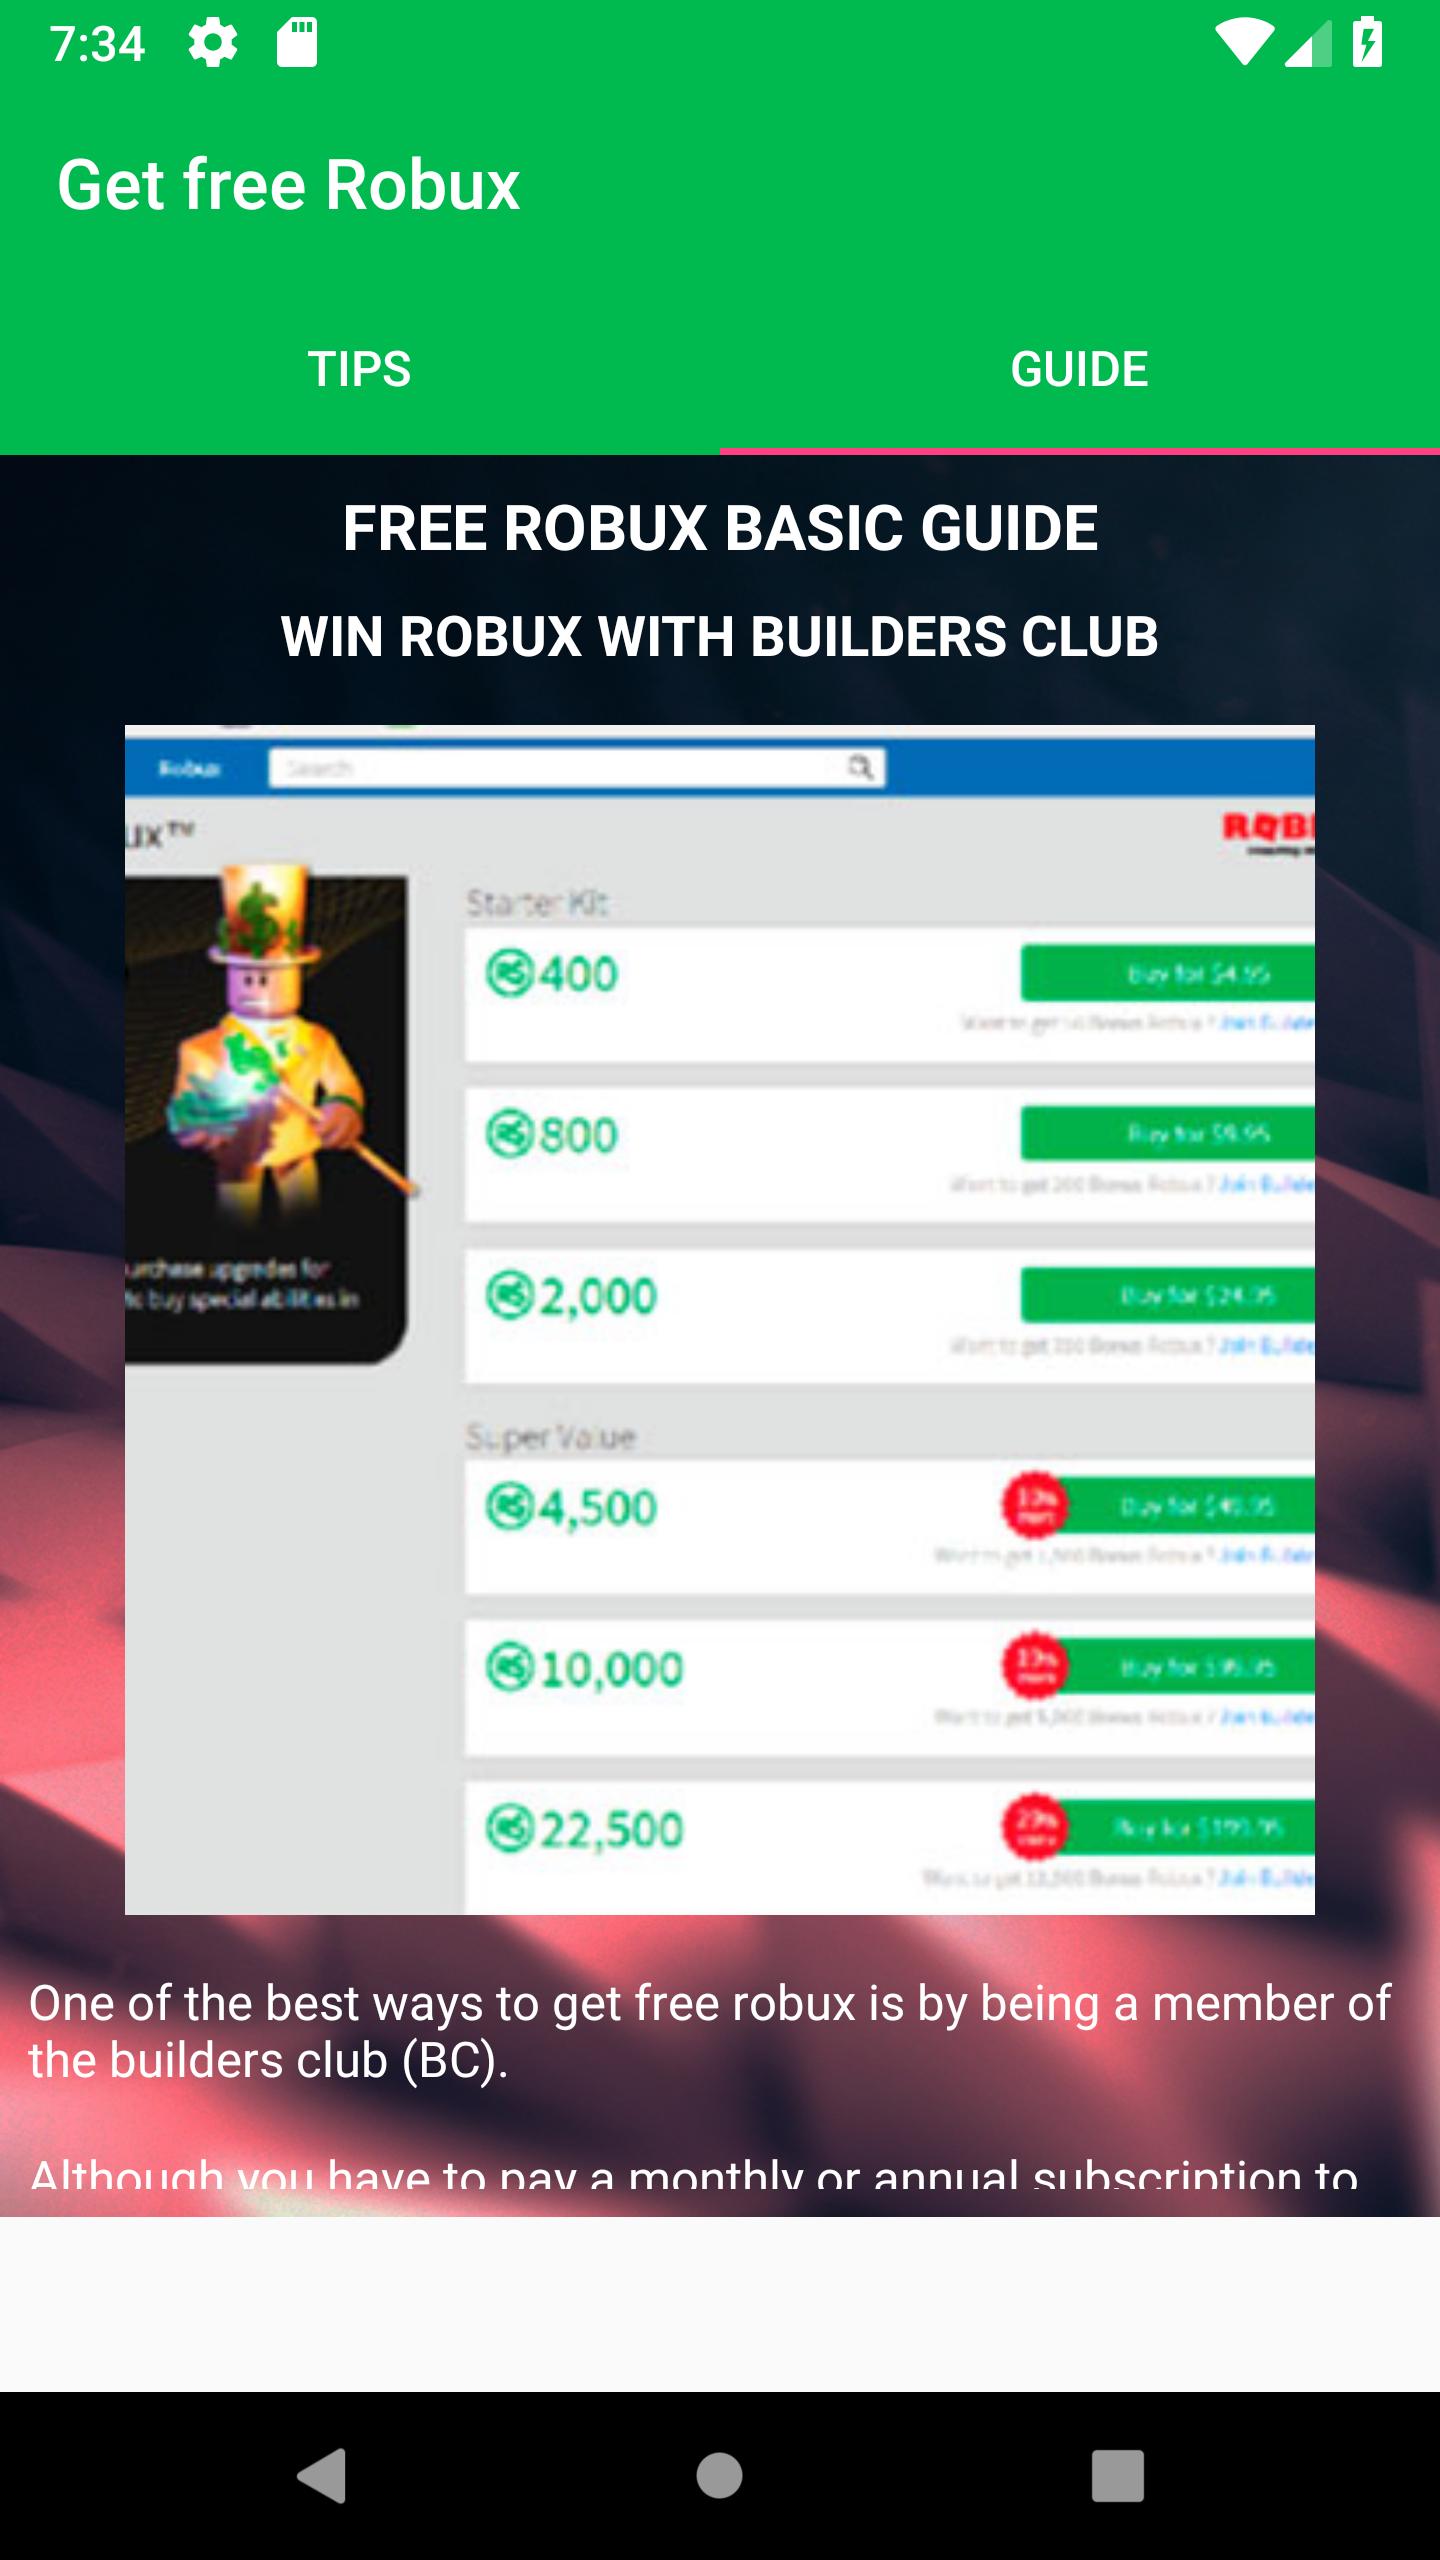 Free Robux Now Earn Robux Free Today Tips 2019 For Android Apk Download - fre robux now